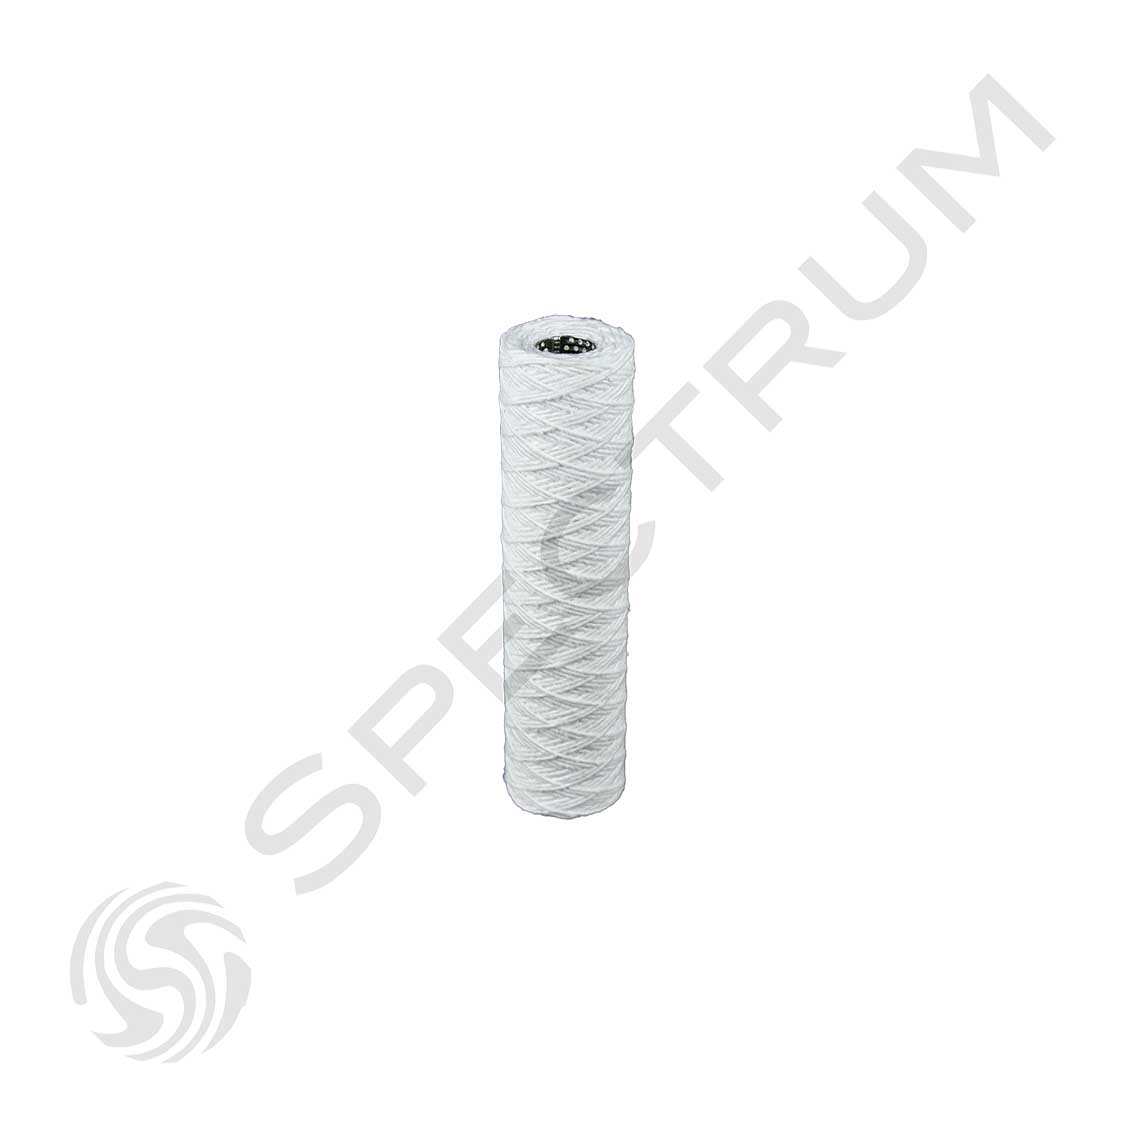 SPECTRUM SWC-10-10 Wound Cotton Filter Cartridge with Stainless Steel Core  10 micron  10